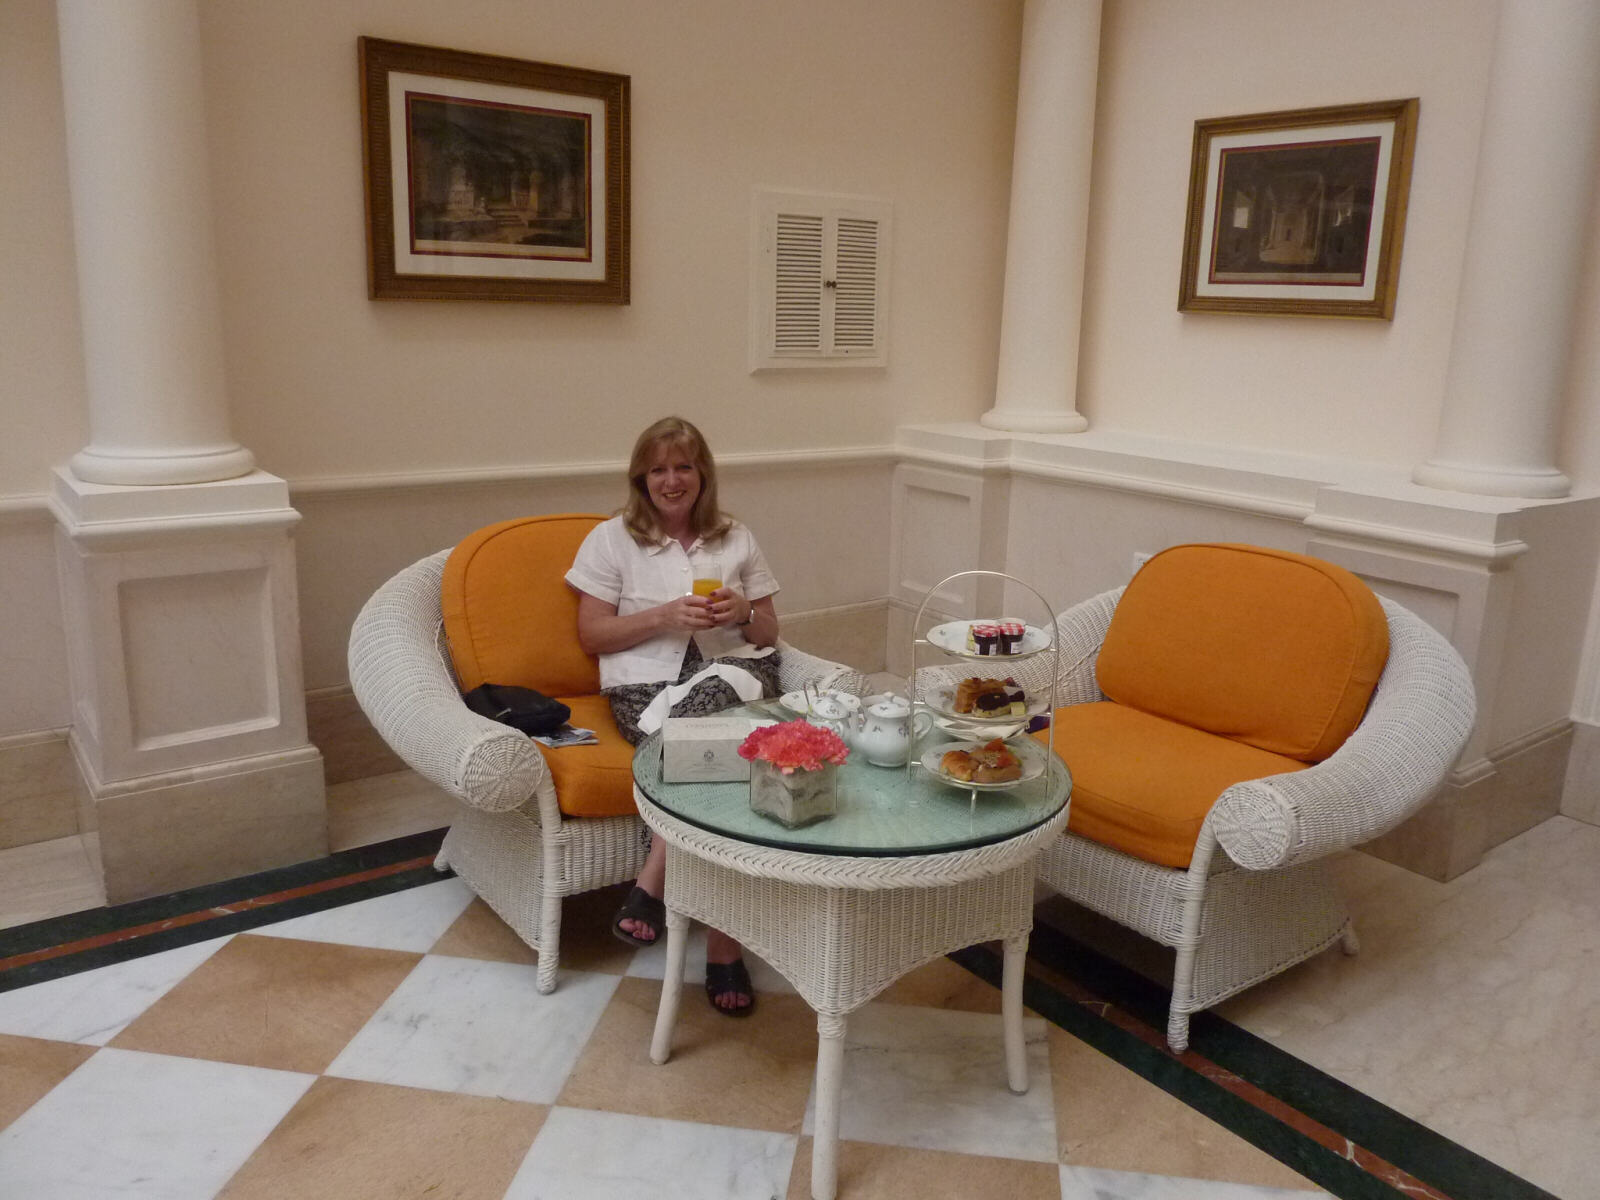 High tea at the old colonial Imperial hotel in Delhi